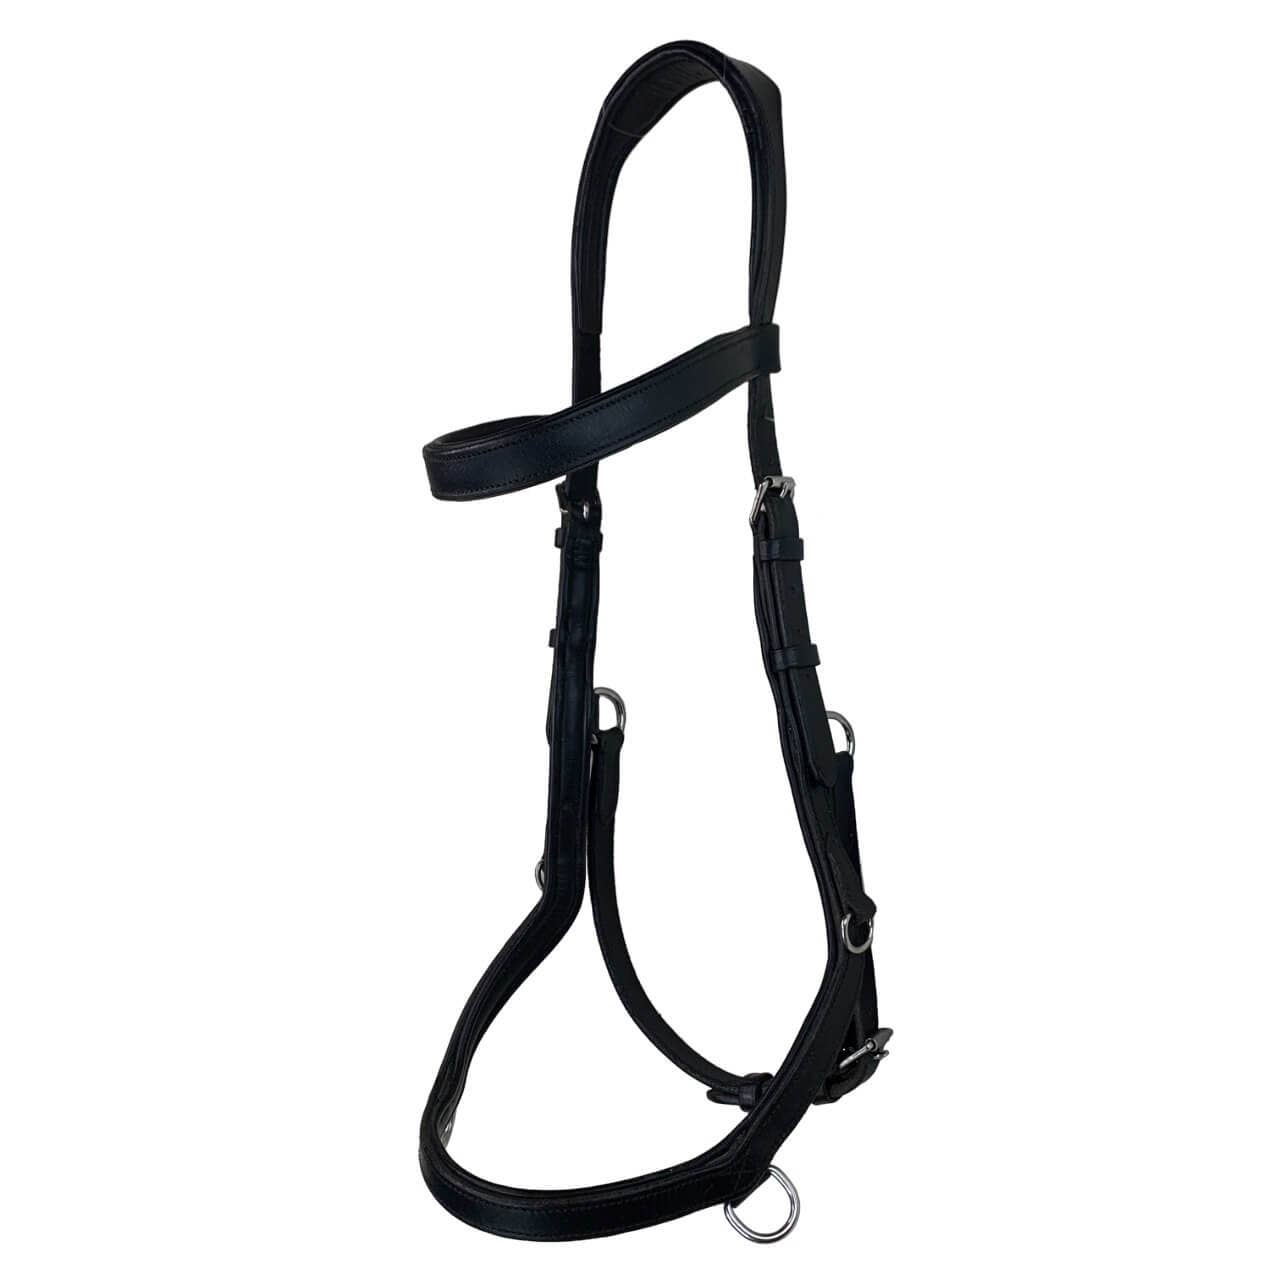 Rambo Horseware Micklem Competition Bridle in Black - Full